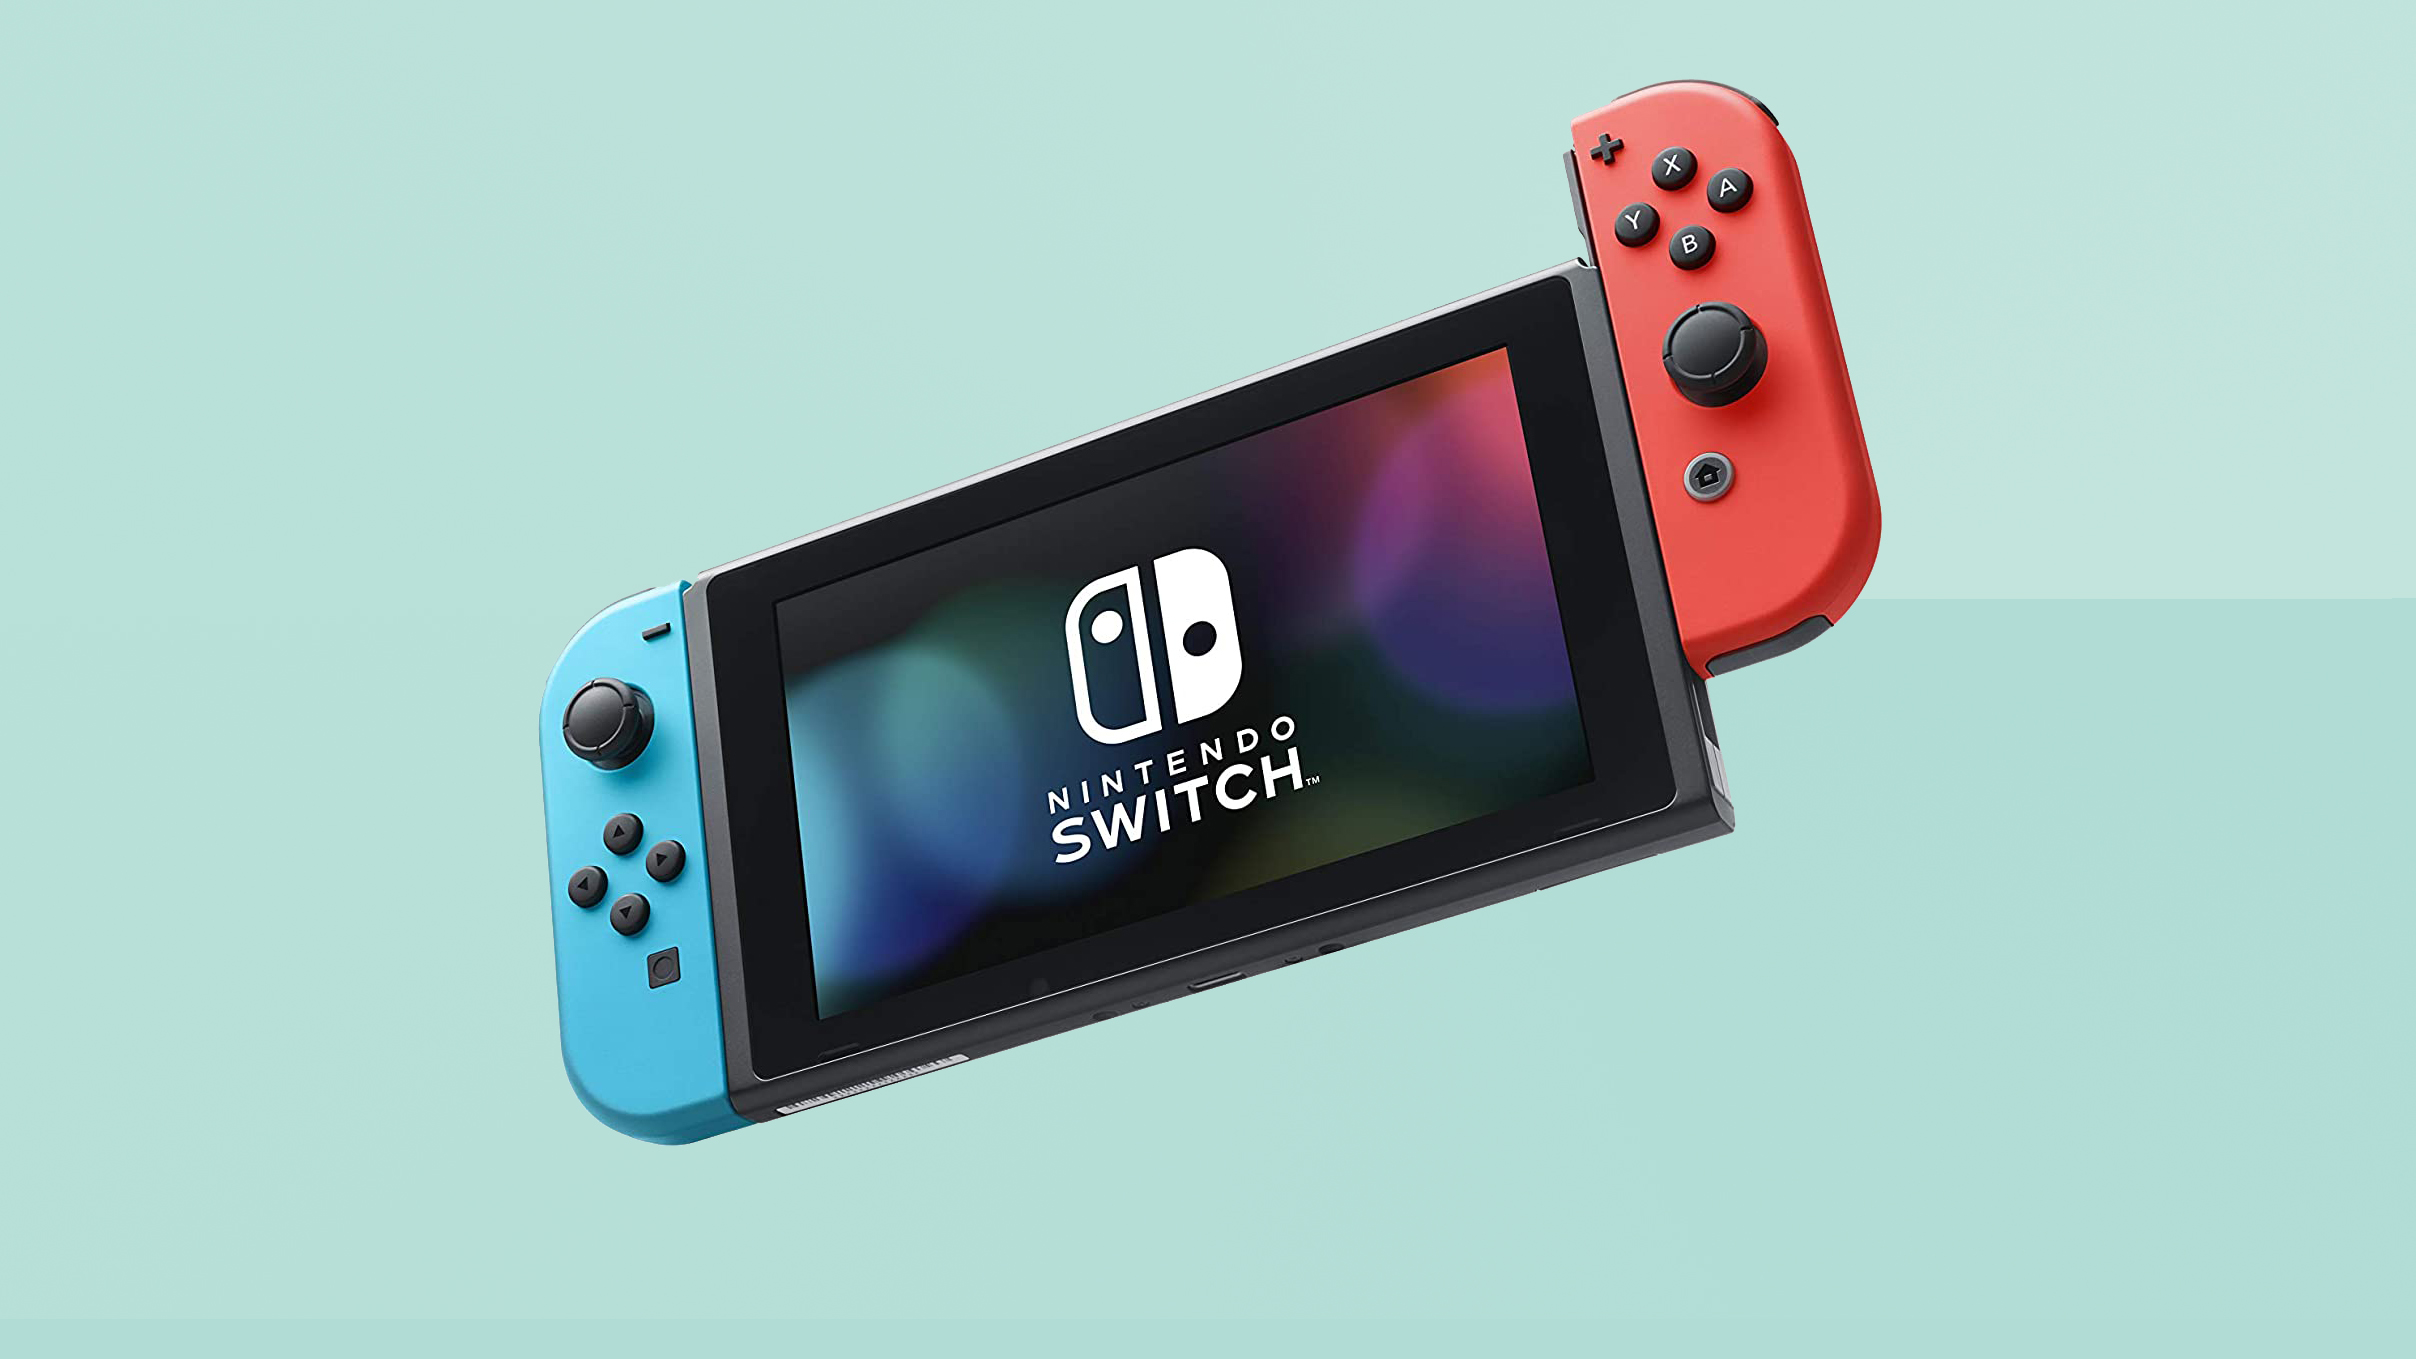 gift a nintendo switch game